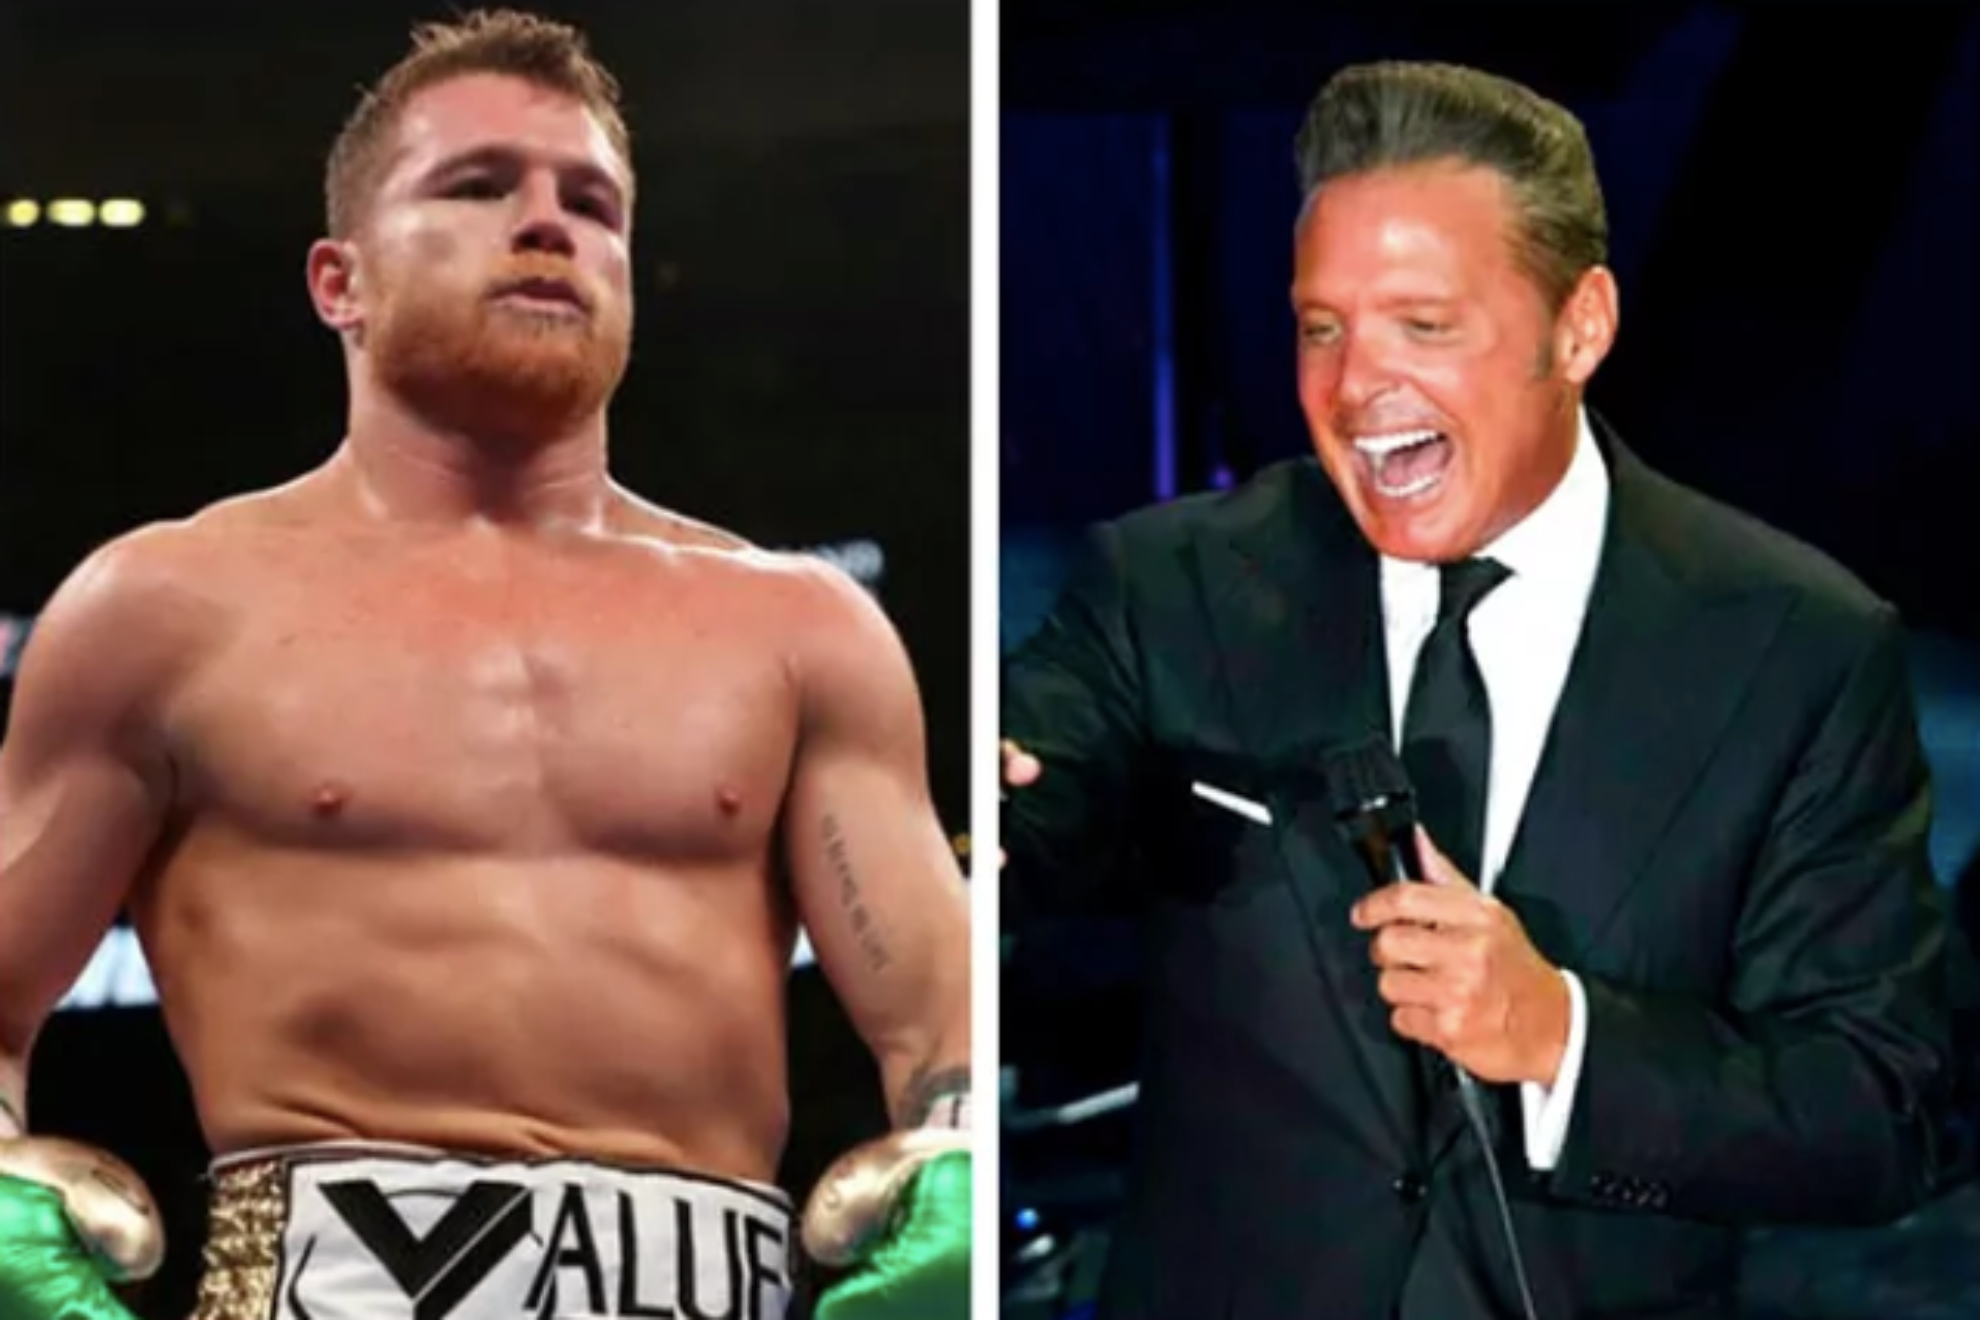 Canelo and Luis Miguel, together for one of his next fights: Don't rule it out